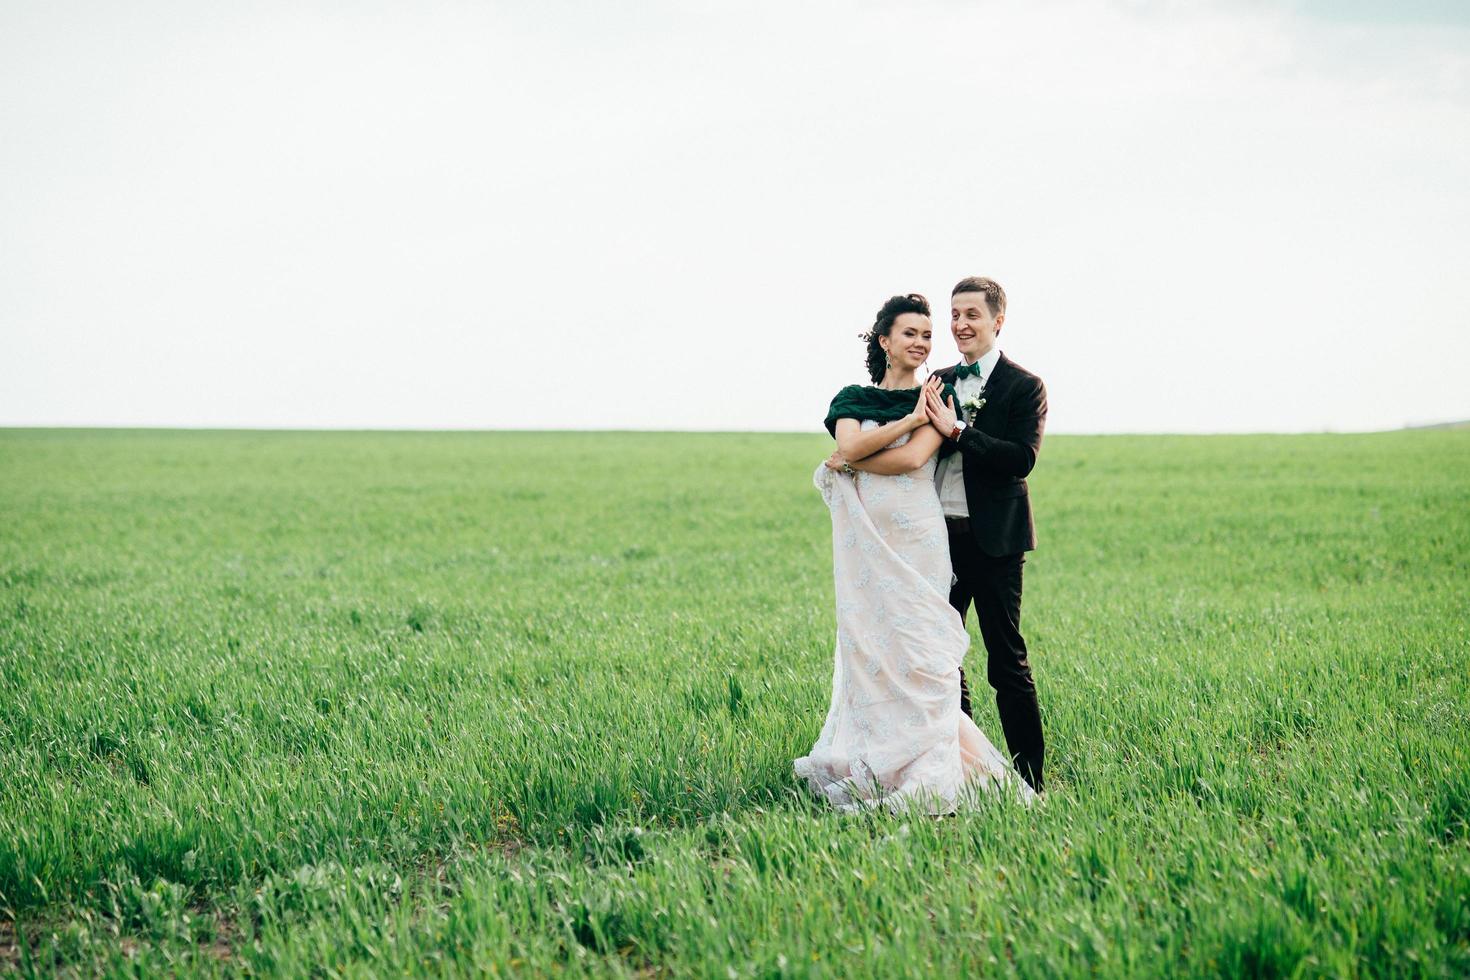 the groom in a brown suit and the bride in an ivory-colored dress on a green field photo